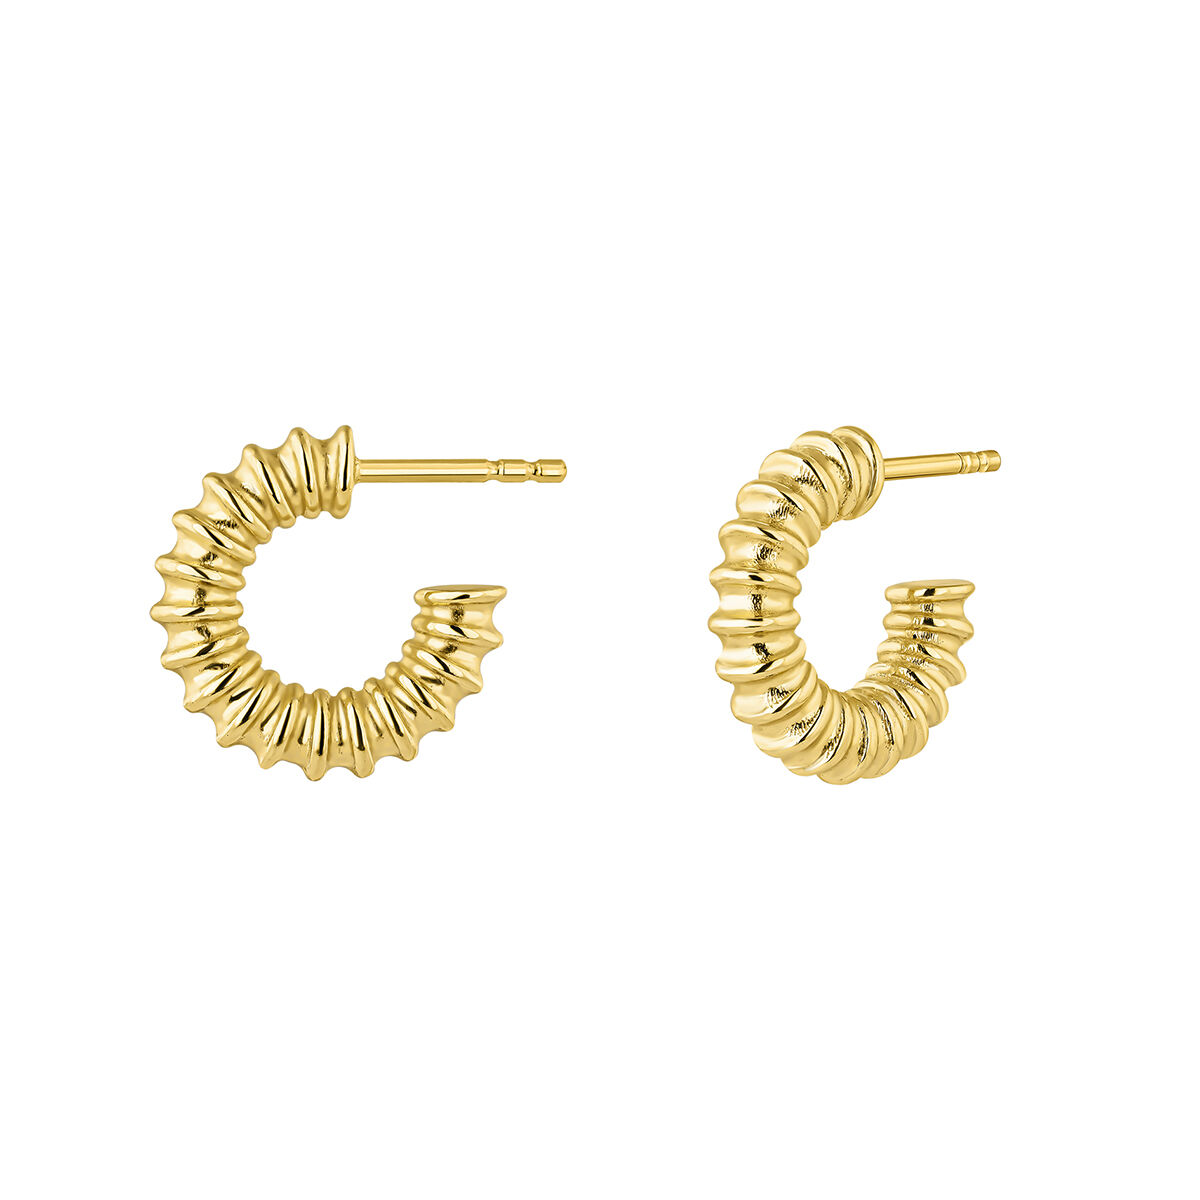 Small hoop earrings in silver with 18k gold plating with texture, J05146-02, hi-res